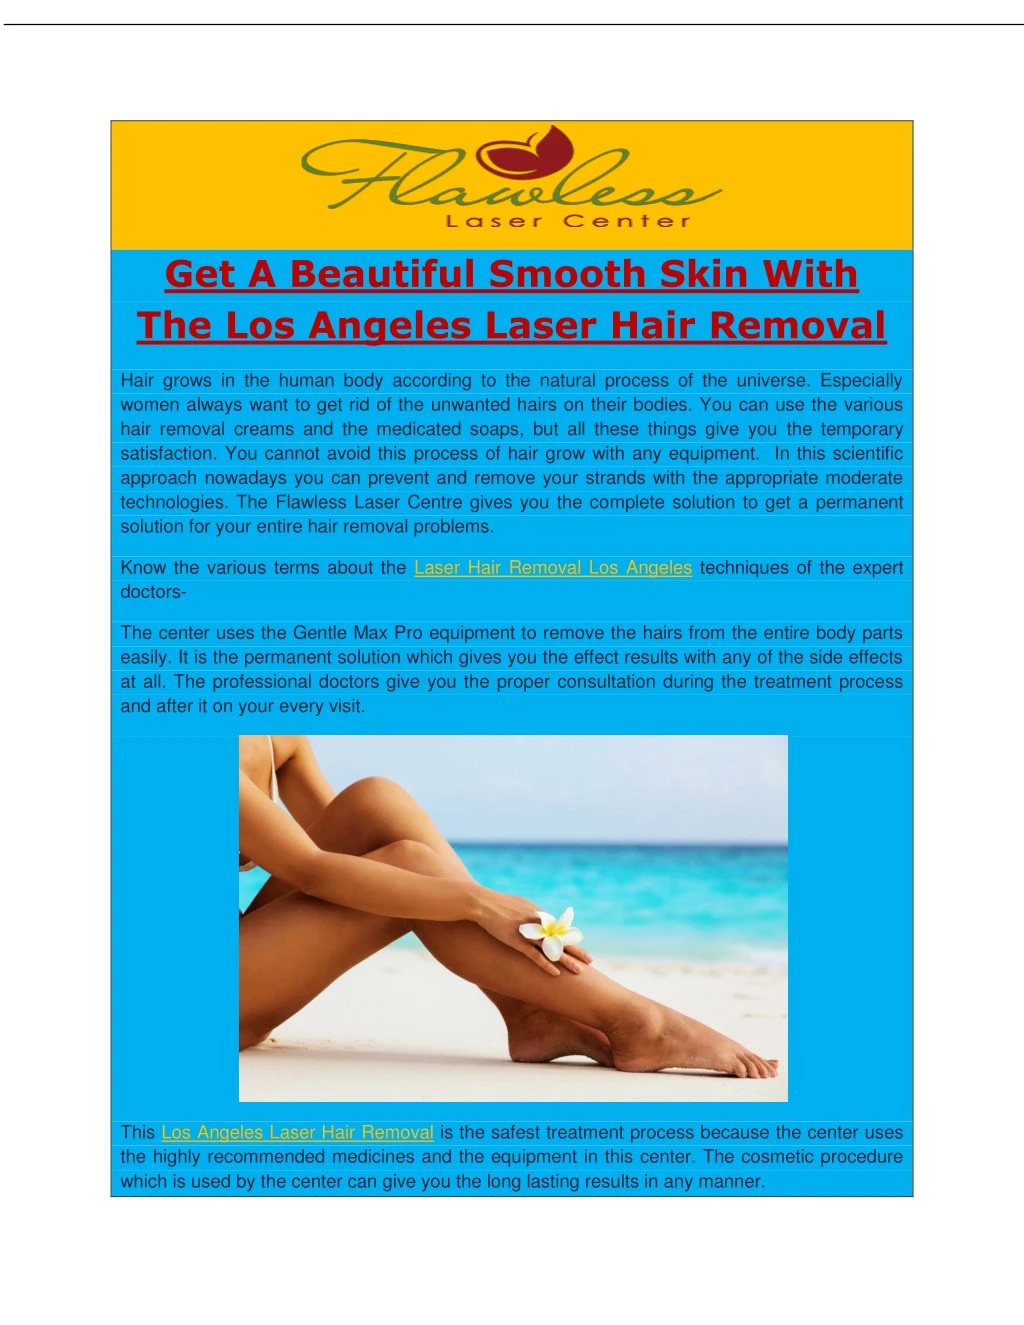 get a beautiful smooth skin with the los angeles